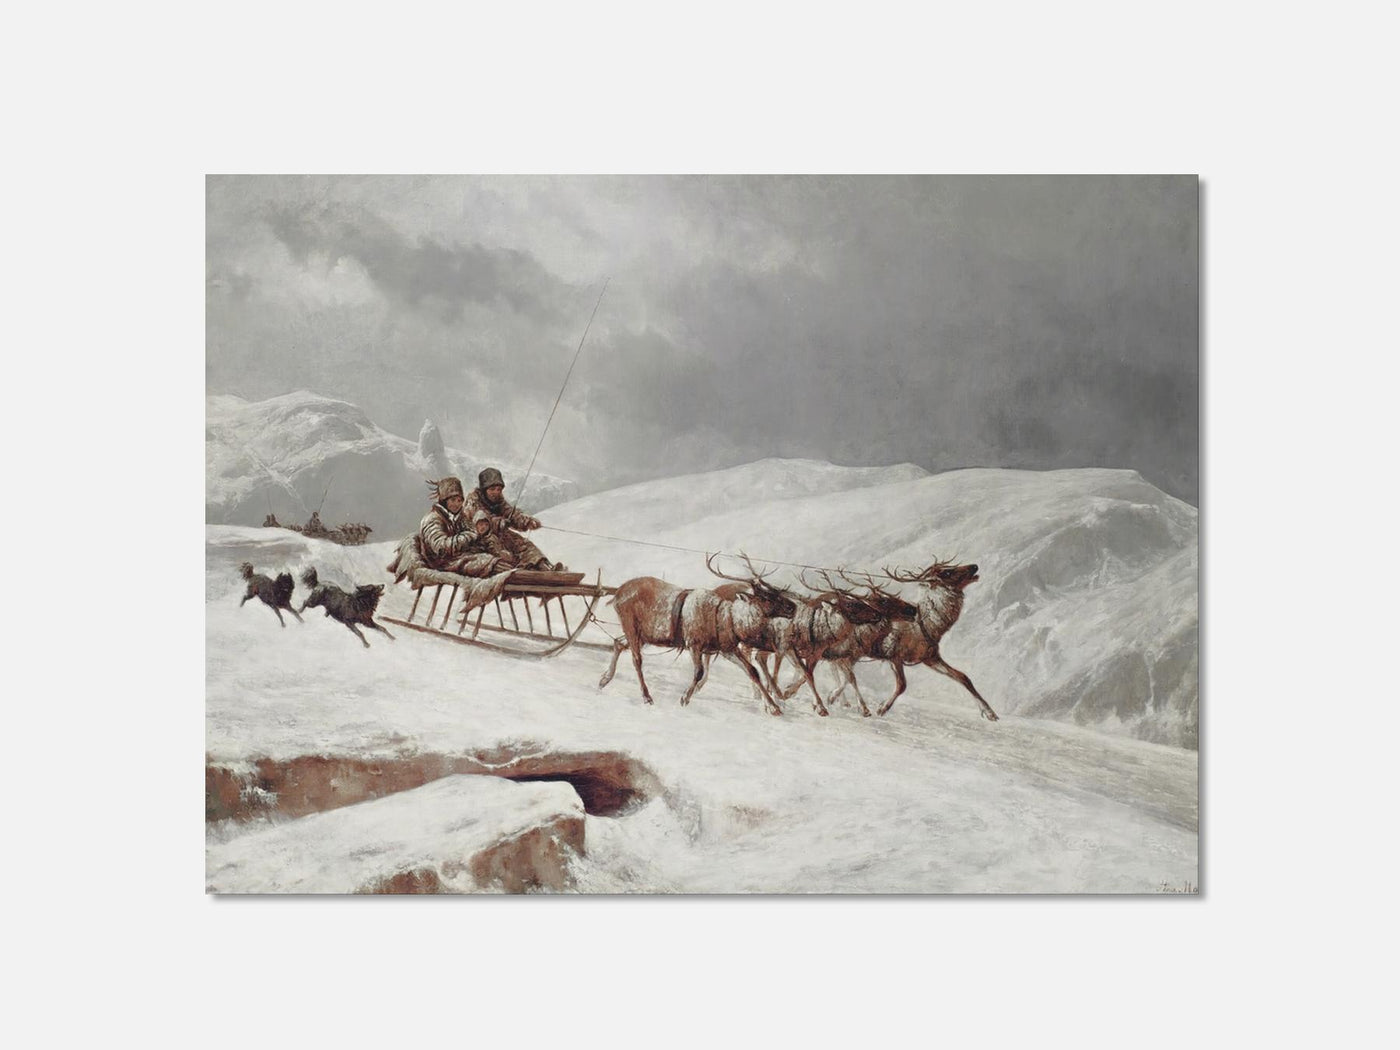 Reindeer Sleigh Ride mockup - A_w37-V1-PC_AP-SS_1-PS_5x7-C_def